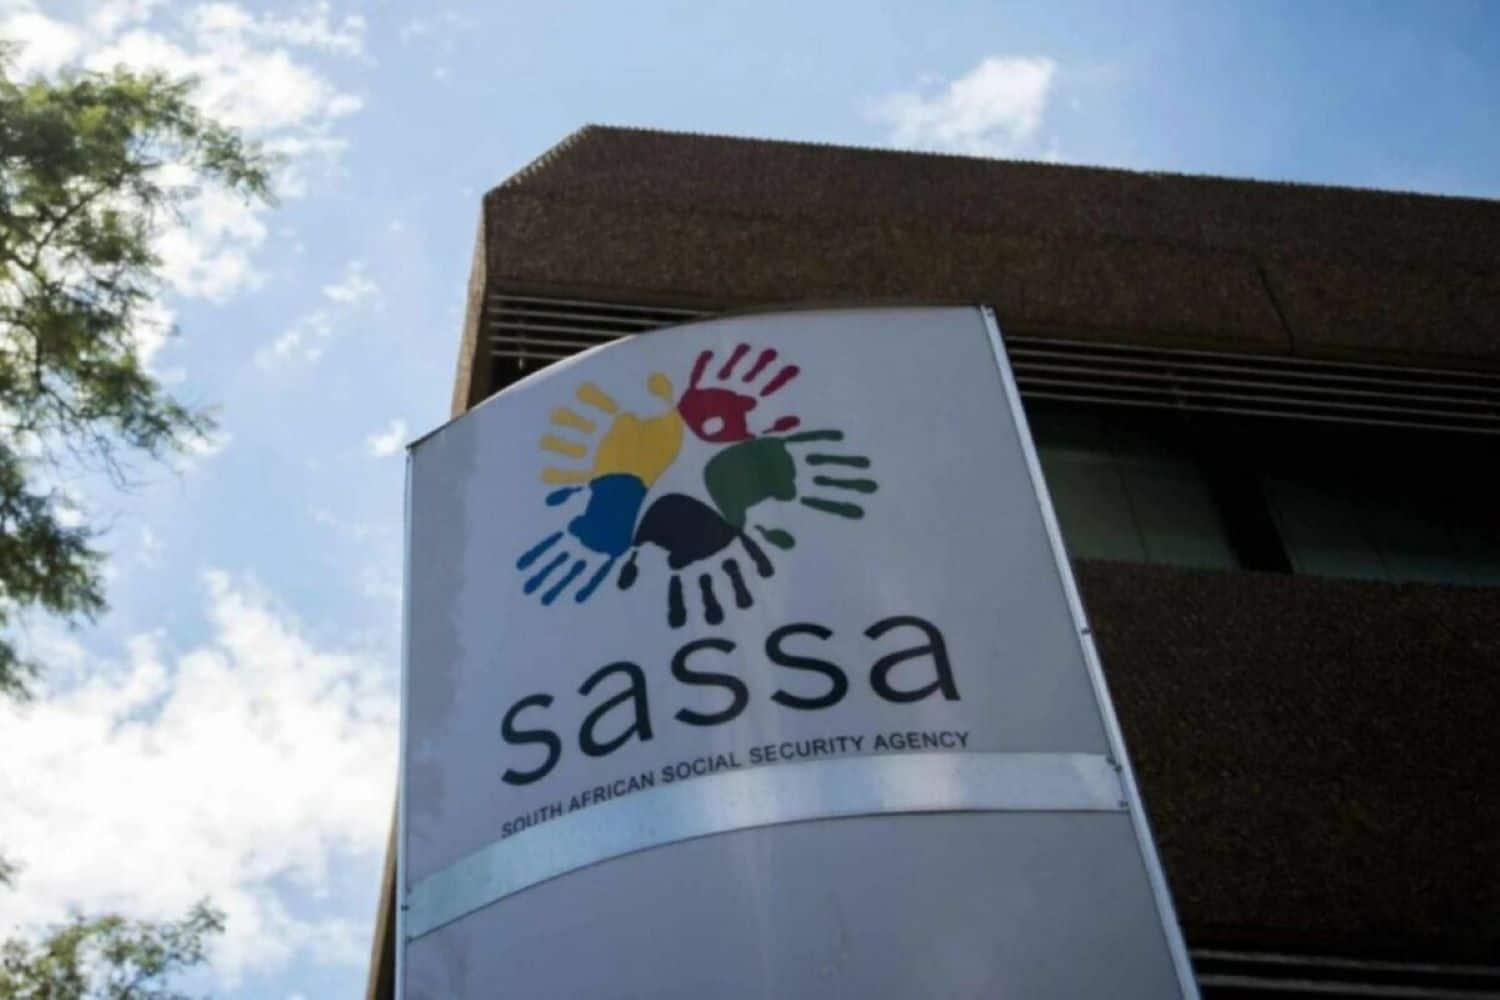 R350 SRD Grant Beneficiaries Approved This Month to Receive Payments by Friday - SASSA Update